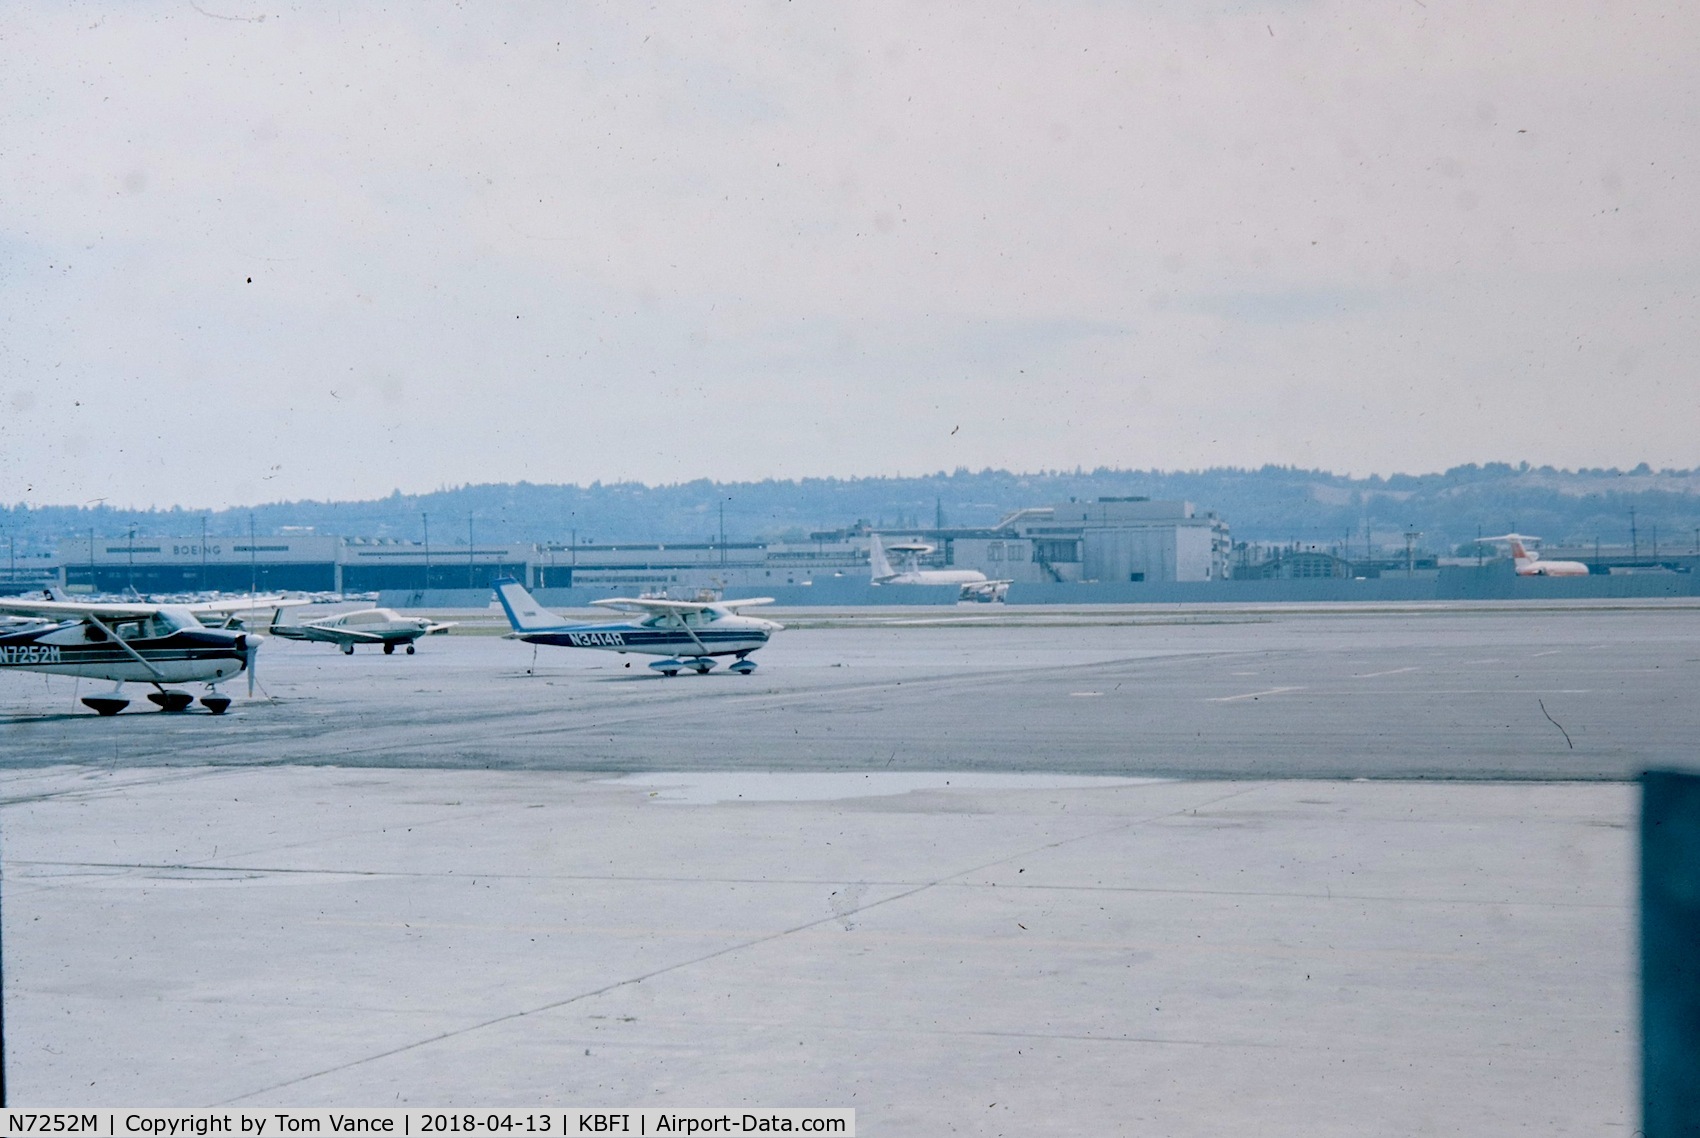 N7252M, 1958 Cessna 175 Skylark C/N 55552, Boeing Field circa 1973-75 - westerly view near the BFI terminal. The 727 is PSA.